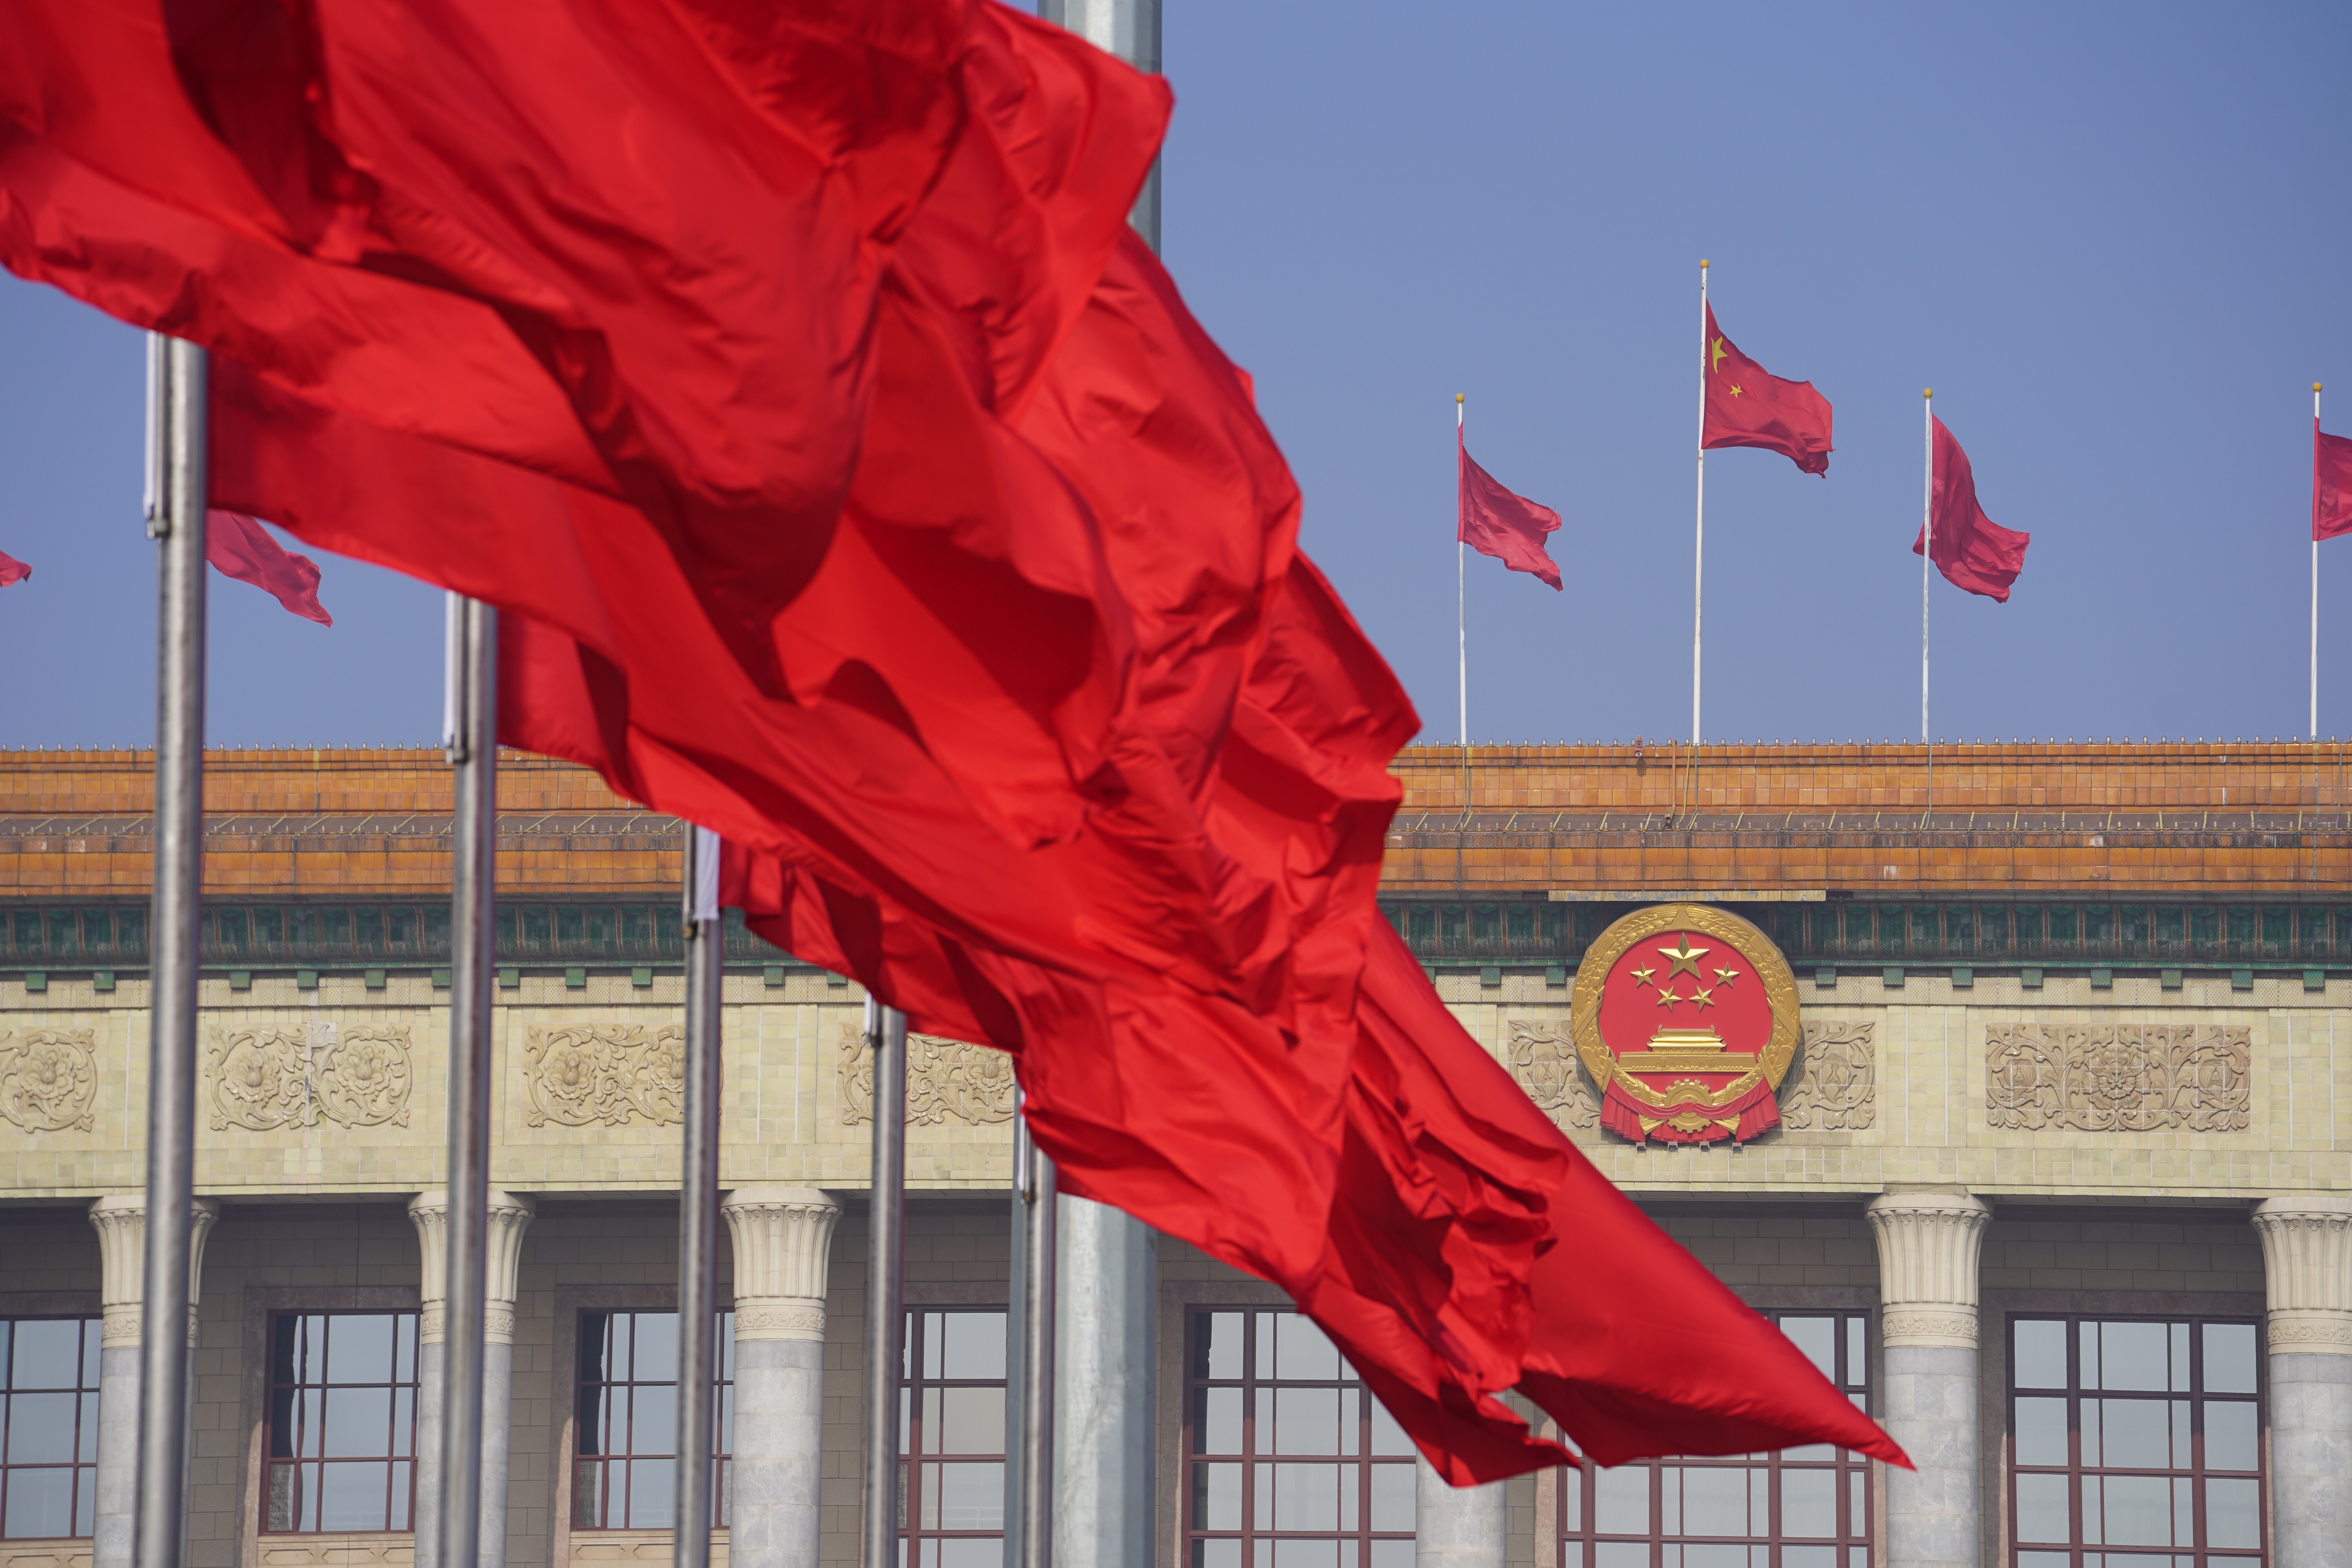 The November meeting will be important for President Xi Jinping to reinforce the party’s official narrative and his status ahead of next year’s national congress. Photo: Xinhua